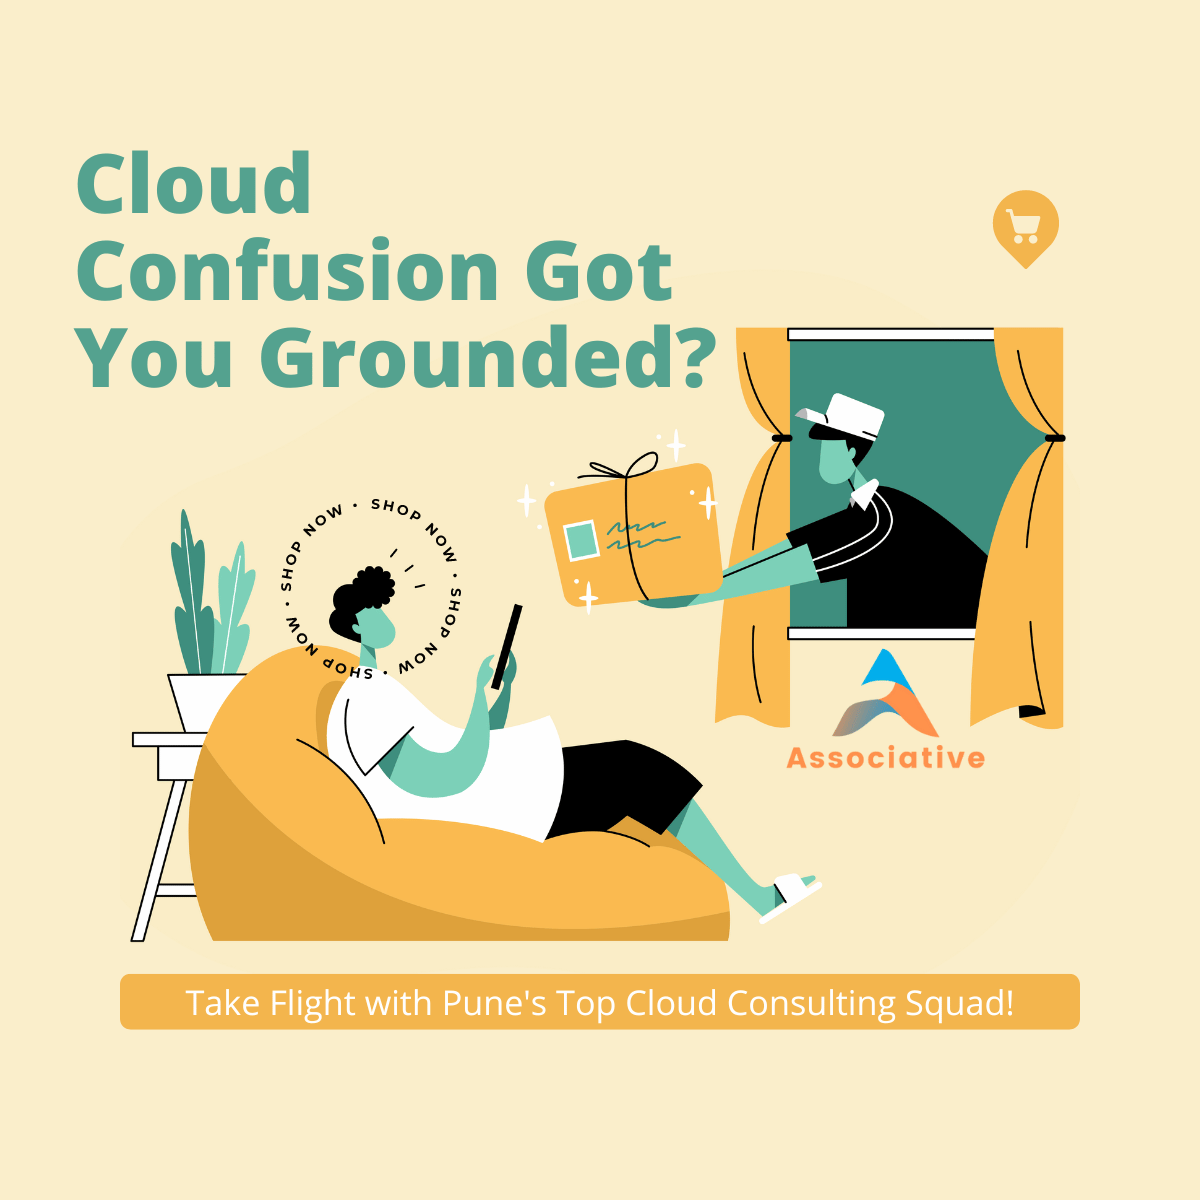 Cloud Confusion Got You Grounded? Take Flight with Pune's Top Cloud Consulting Squad!